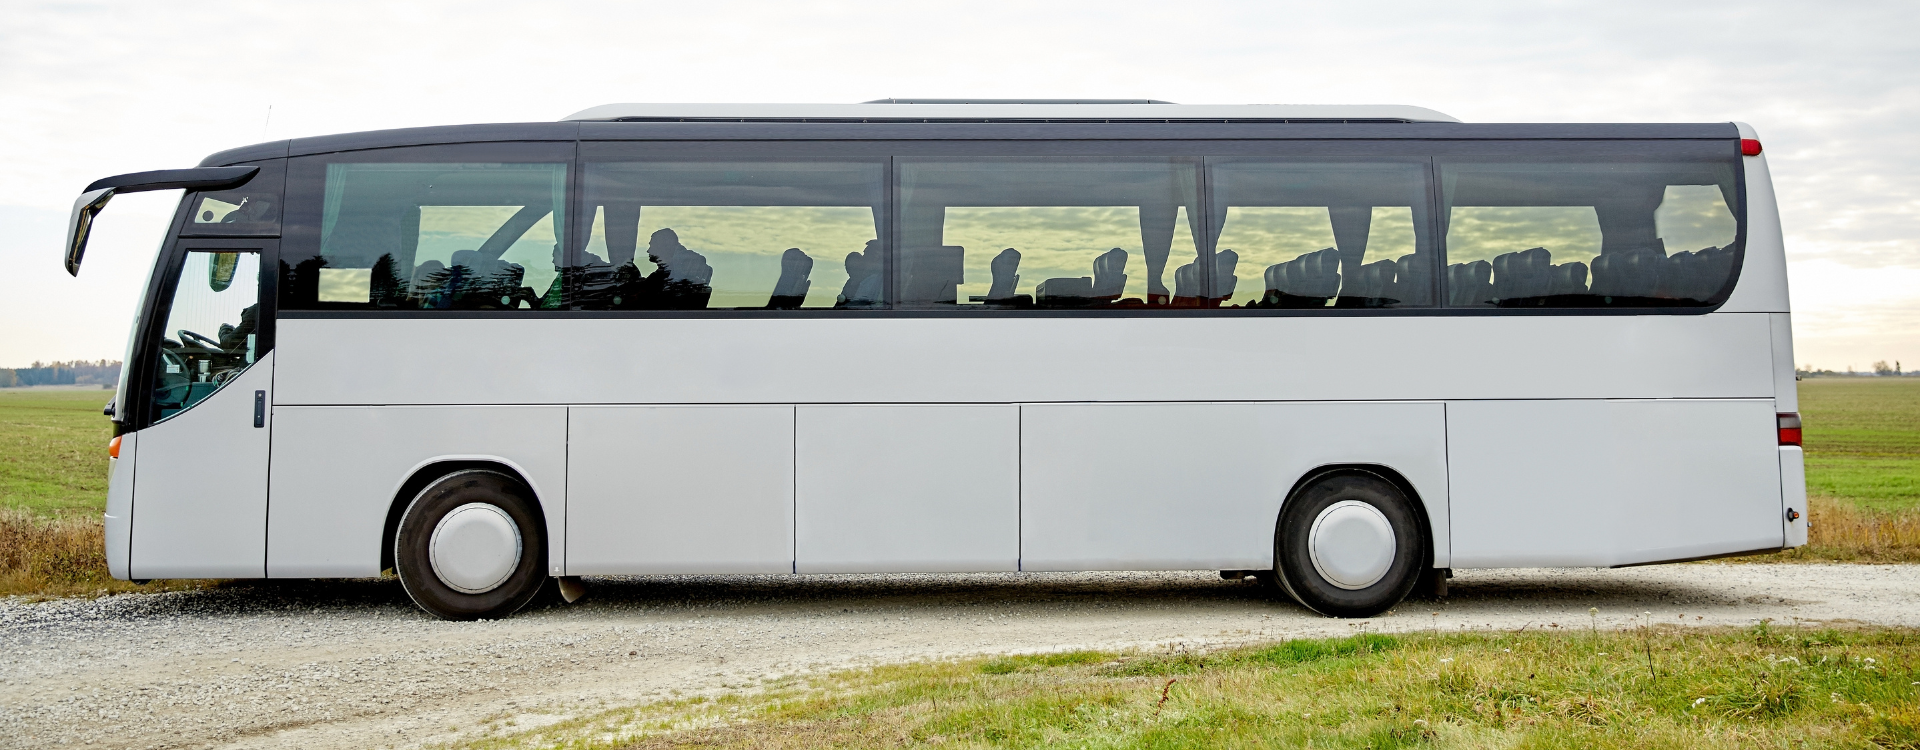 55 Seater Coach Hire London With Driver (1)